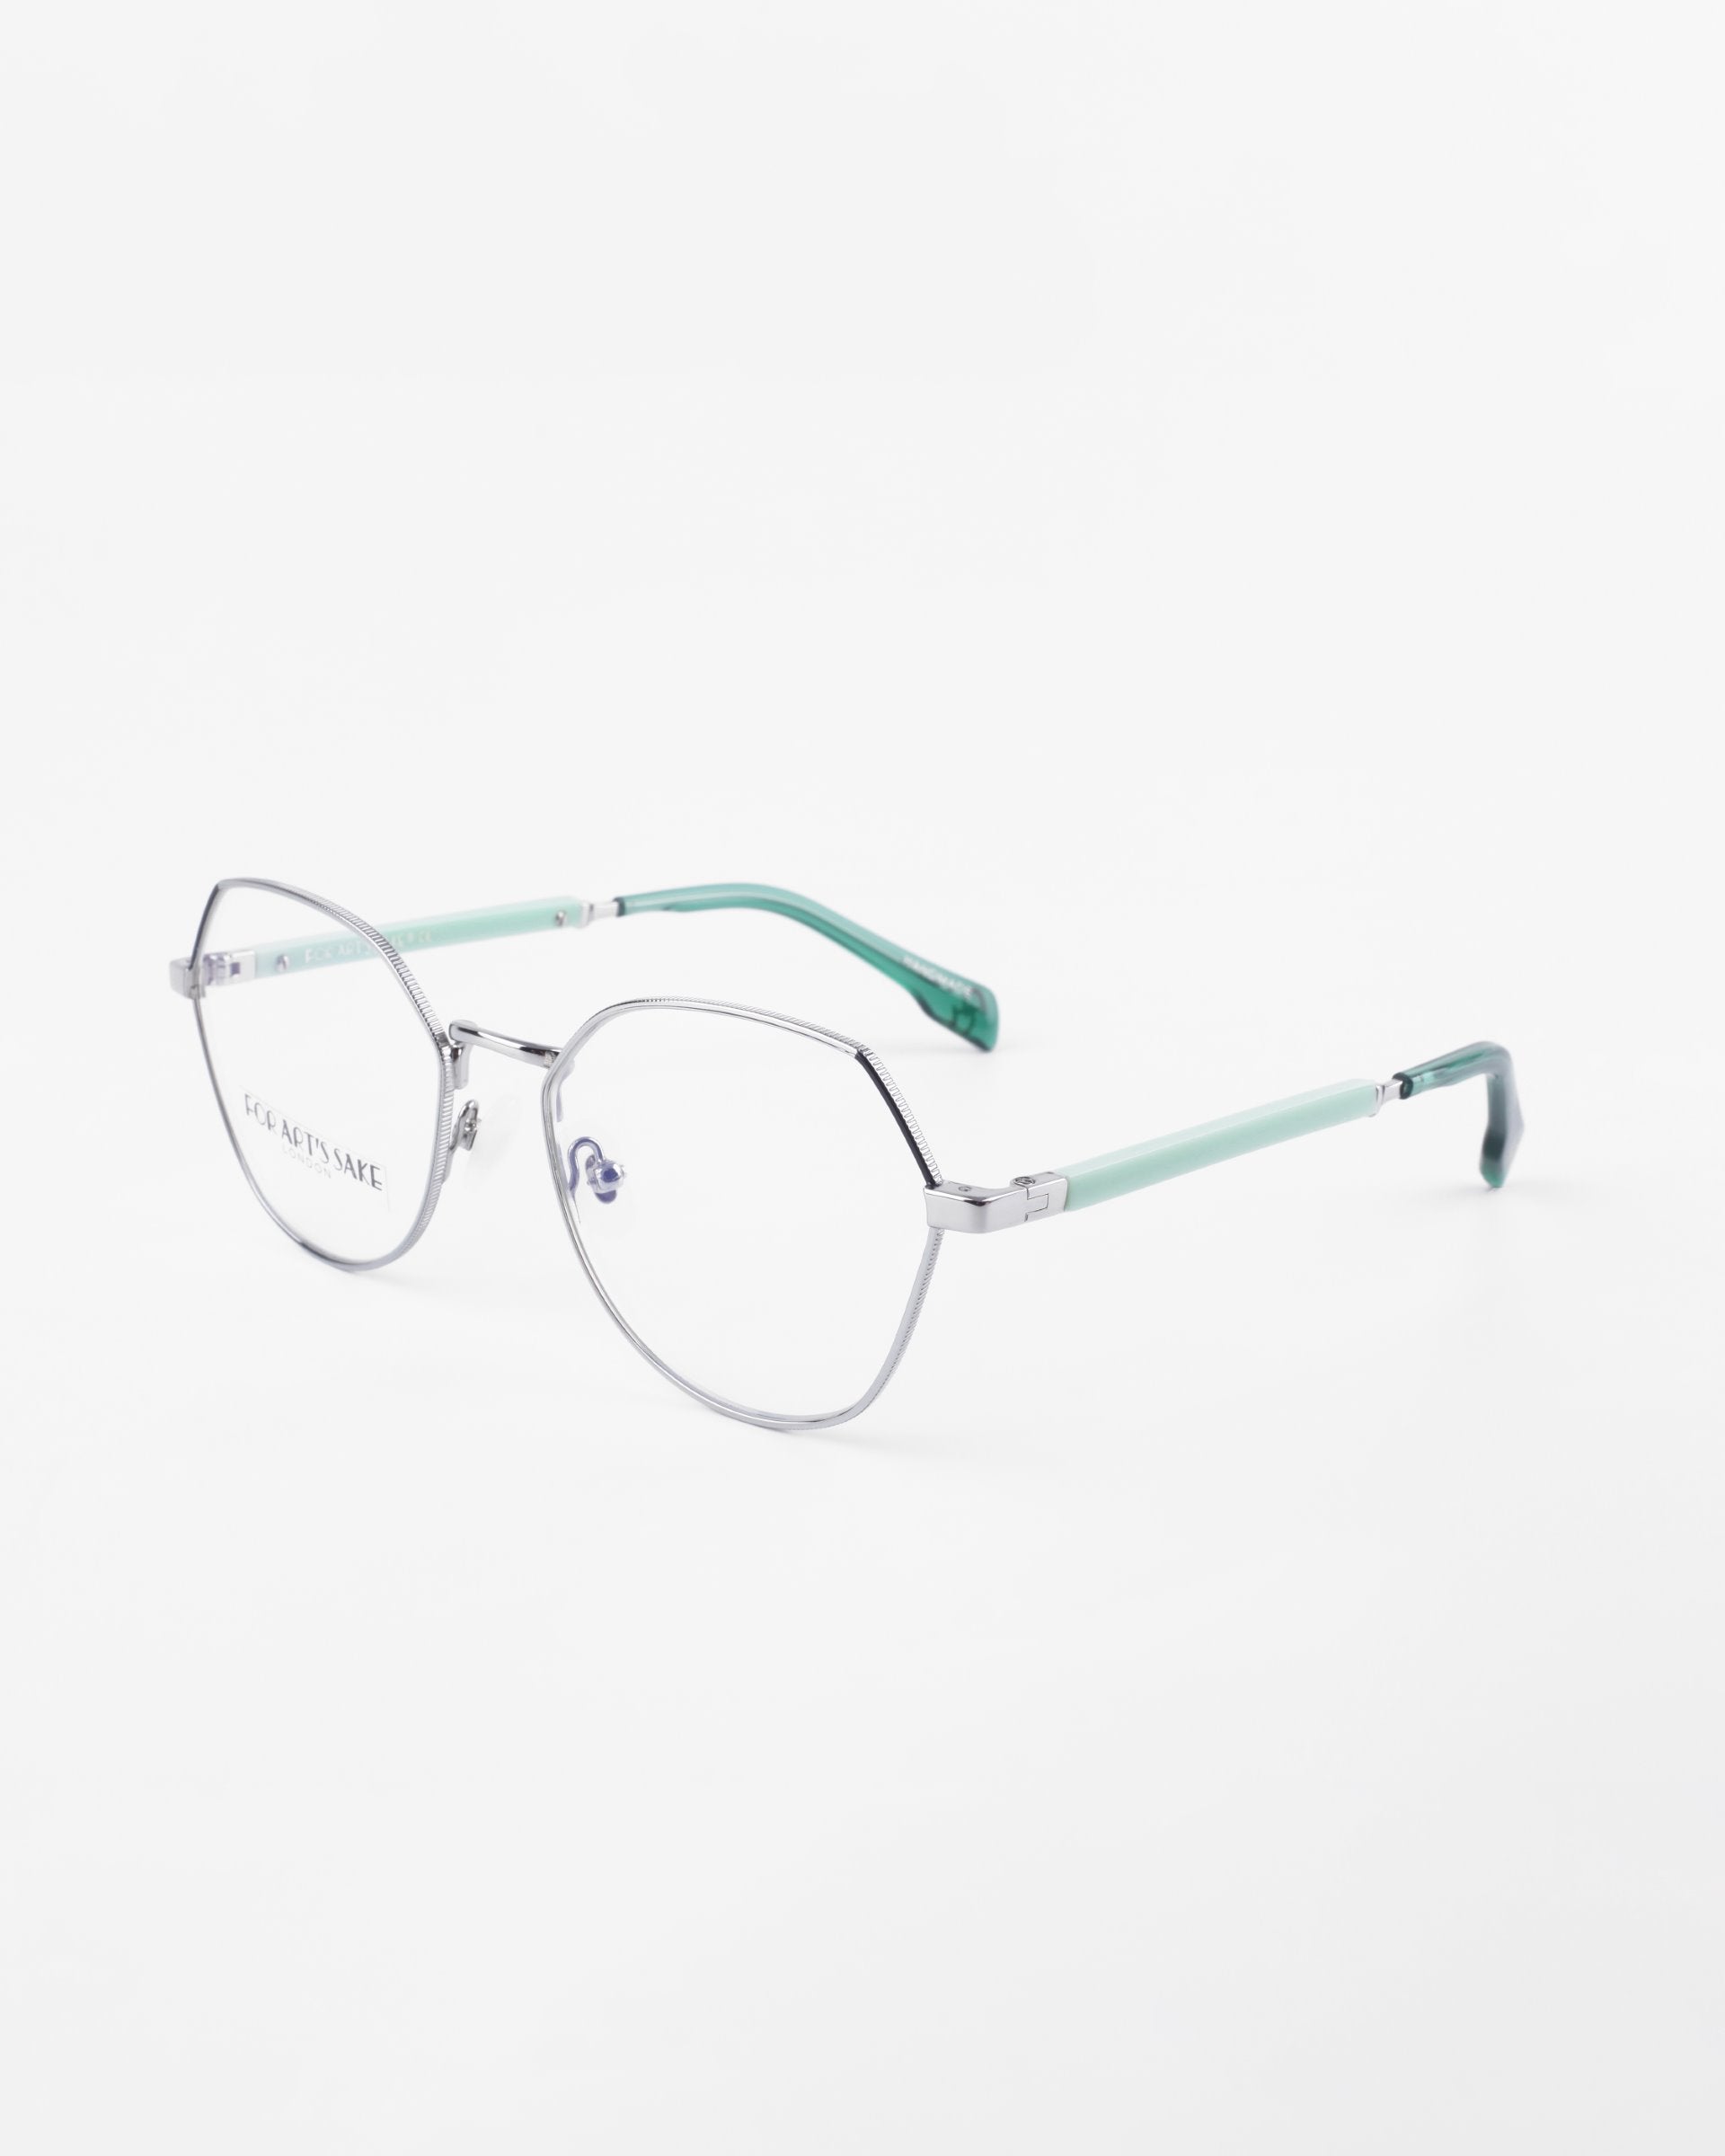 A pair of Orchard by For Art's Sake® eyeglasses with hexagonal silver frames and clear, prescription lenses. The arms of the glasses are light green, creating a modern and stylish look. The background is plain white, highlighting the glasses.